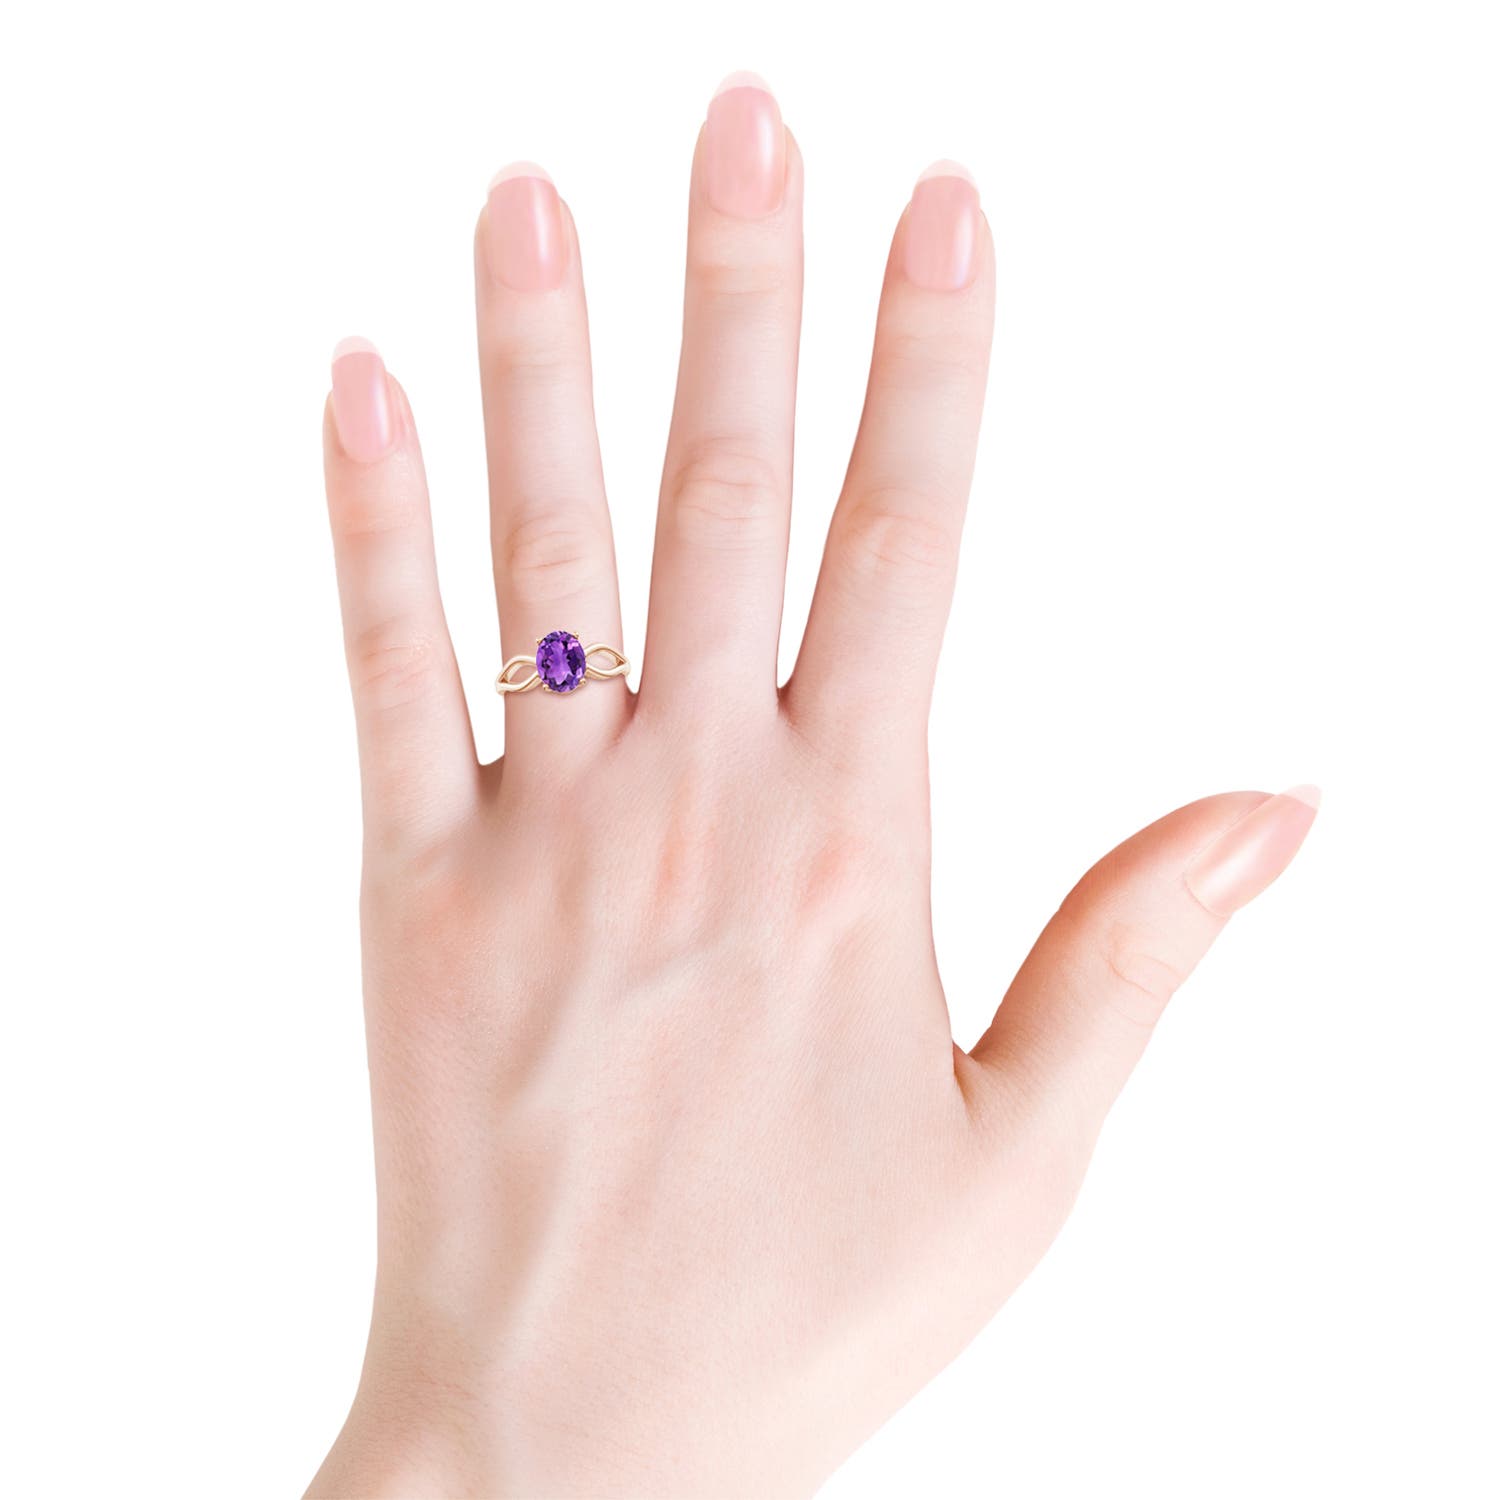 AAA - Amethyst / 1.6 CT / 14 KT Rose Gold